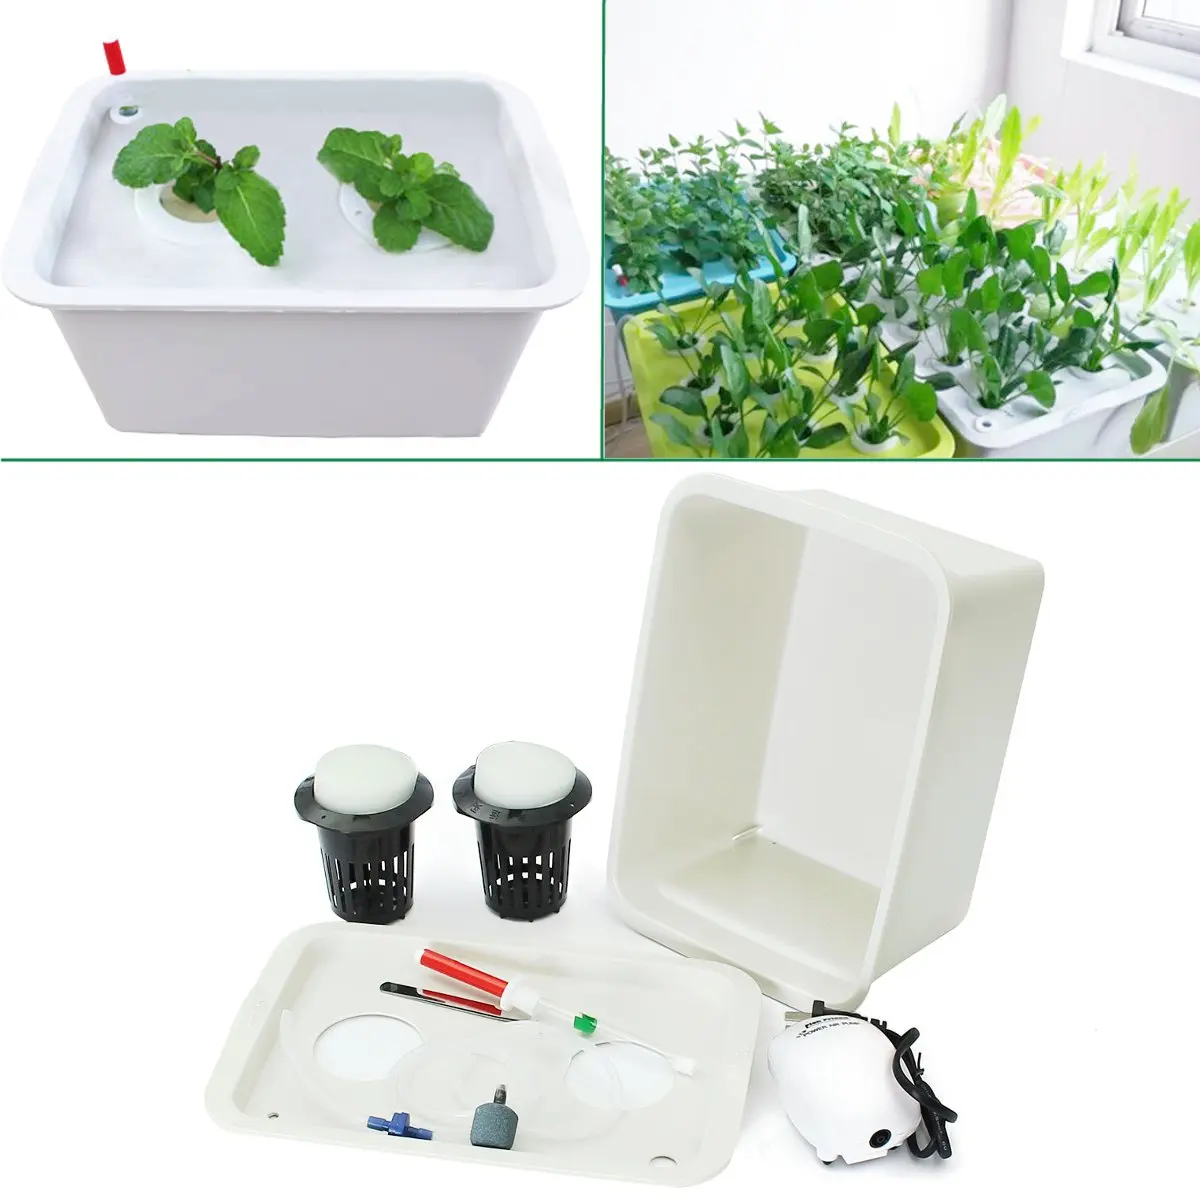 220V Hydroponic System Nursery Pots Plants Grow Kit Water Planting Soilless 2 Holes Garden Home Indoor Cabinet Case